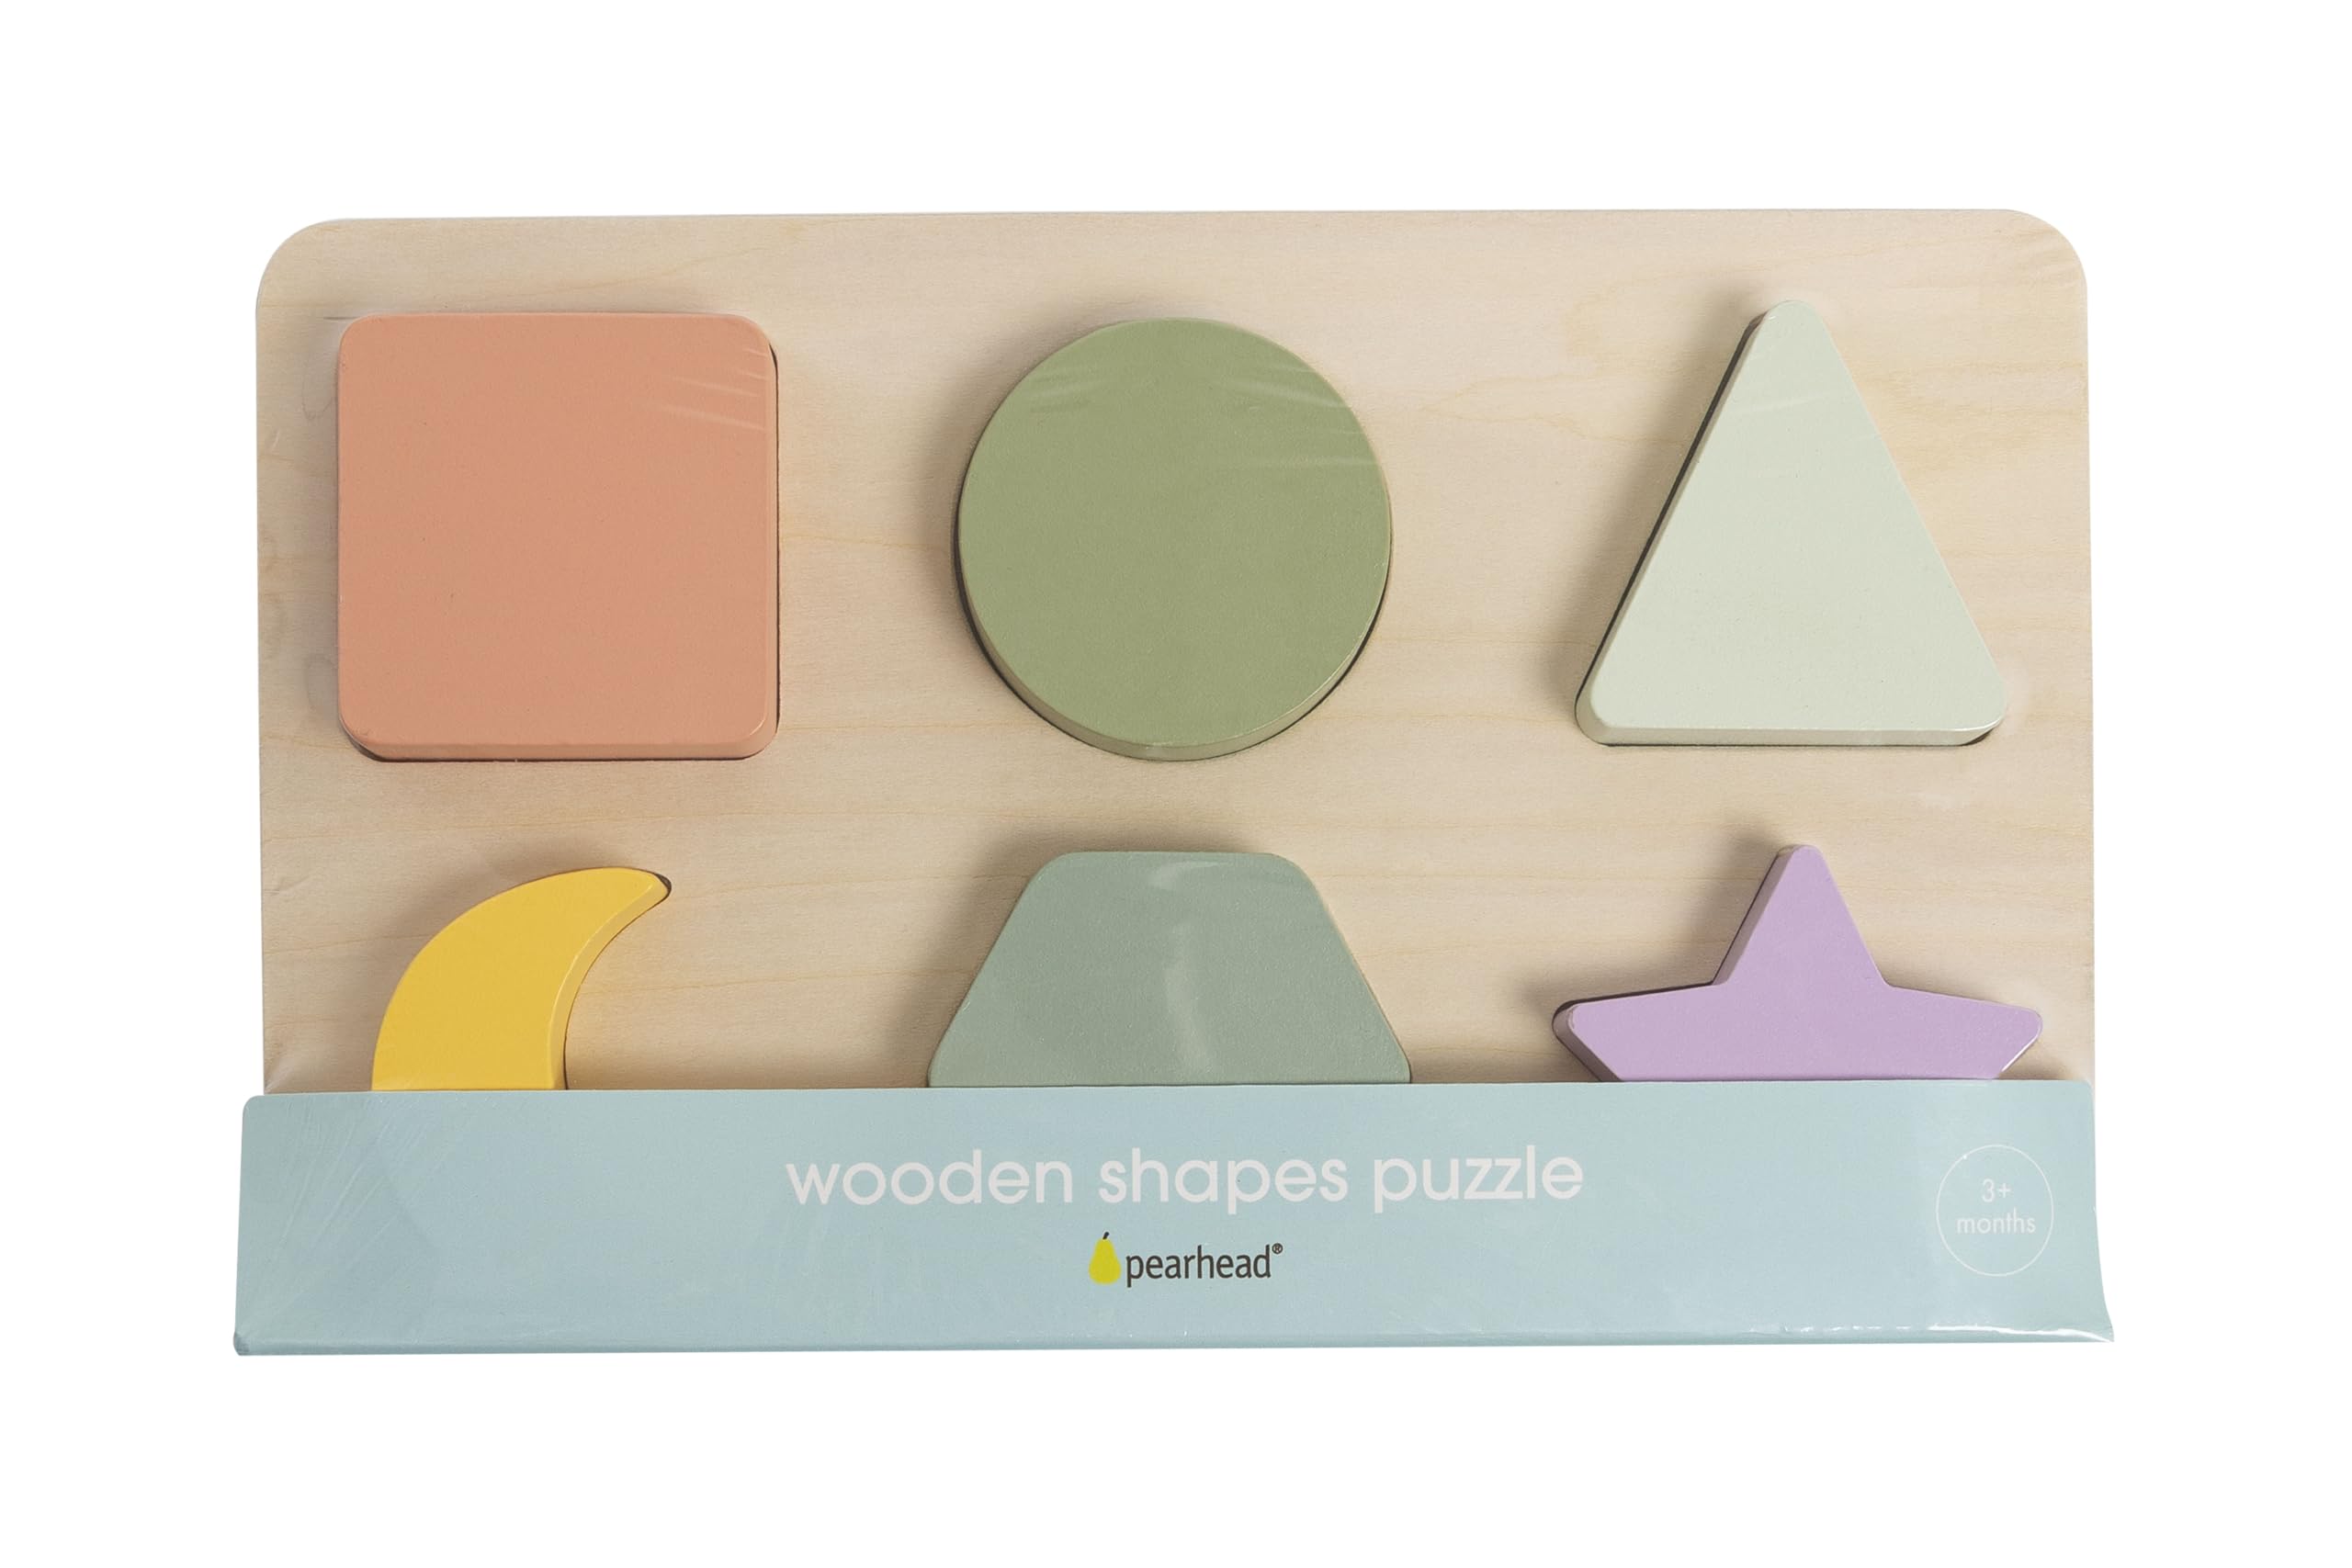 Pearhead Wooden Shapes Puzzle, Interactive Learning Games, Learn Colors and Shapes, Early Developmental Baby and Toddler Wooden Puzzle, 6 Shapes Included, 1+ Year, FSC Certified